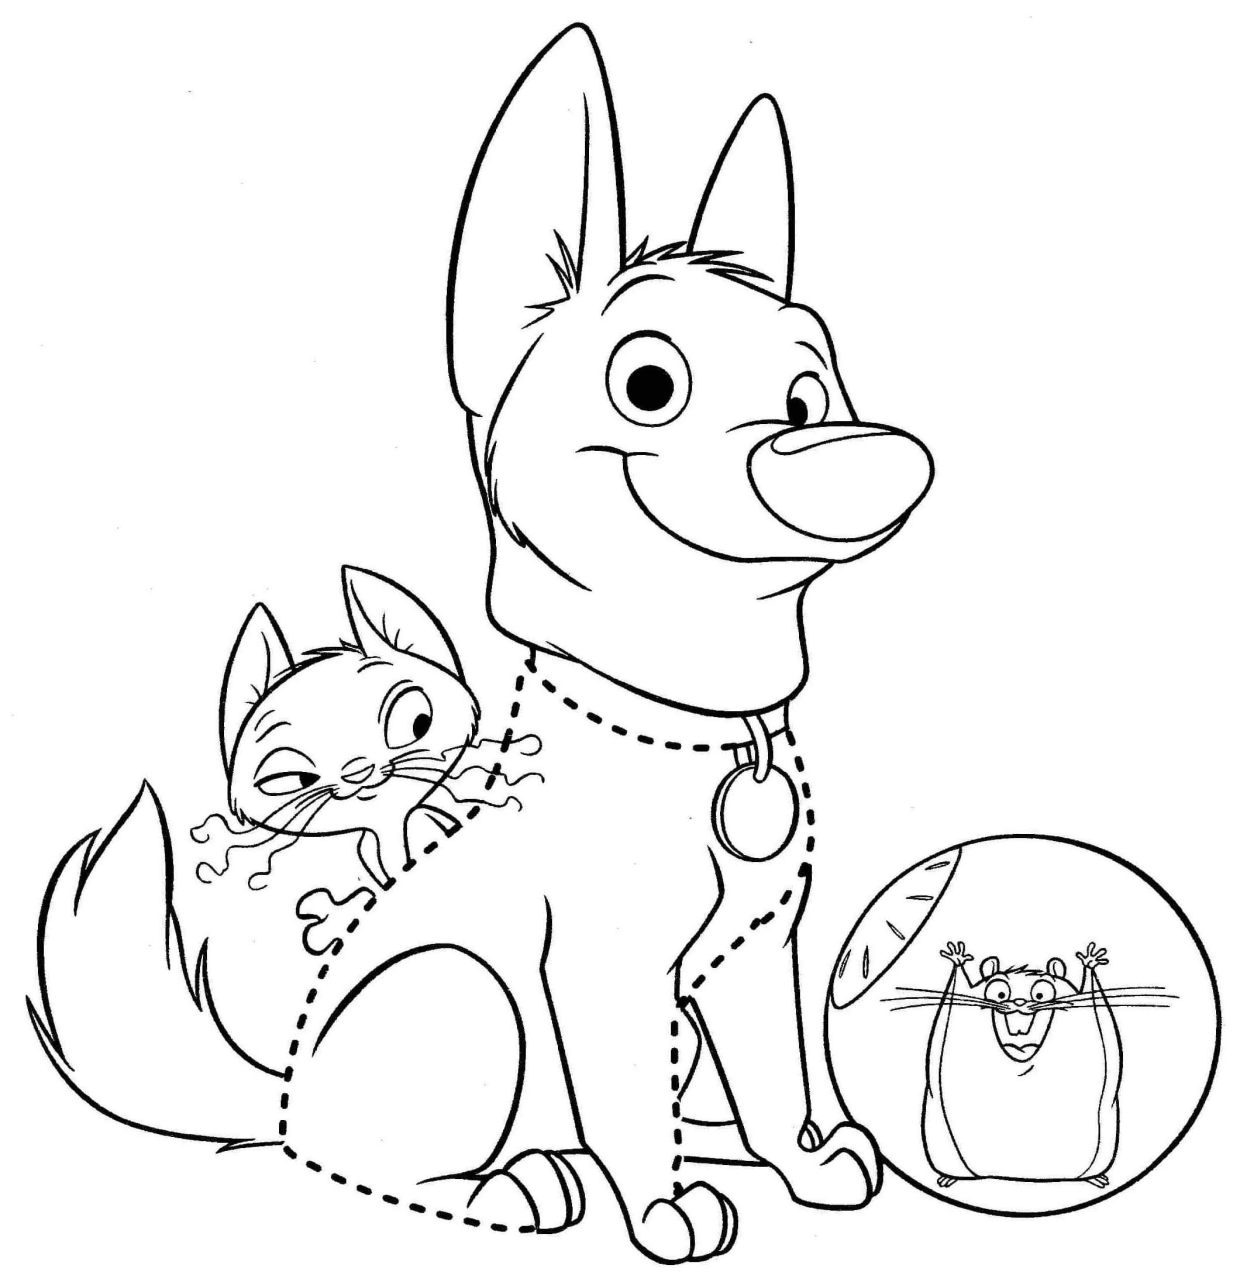 Bolt's Cute Gang Coloring Pages